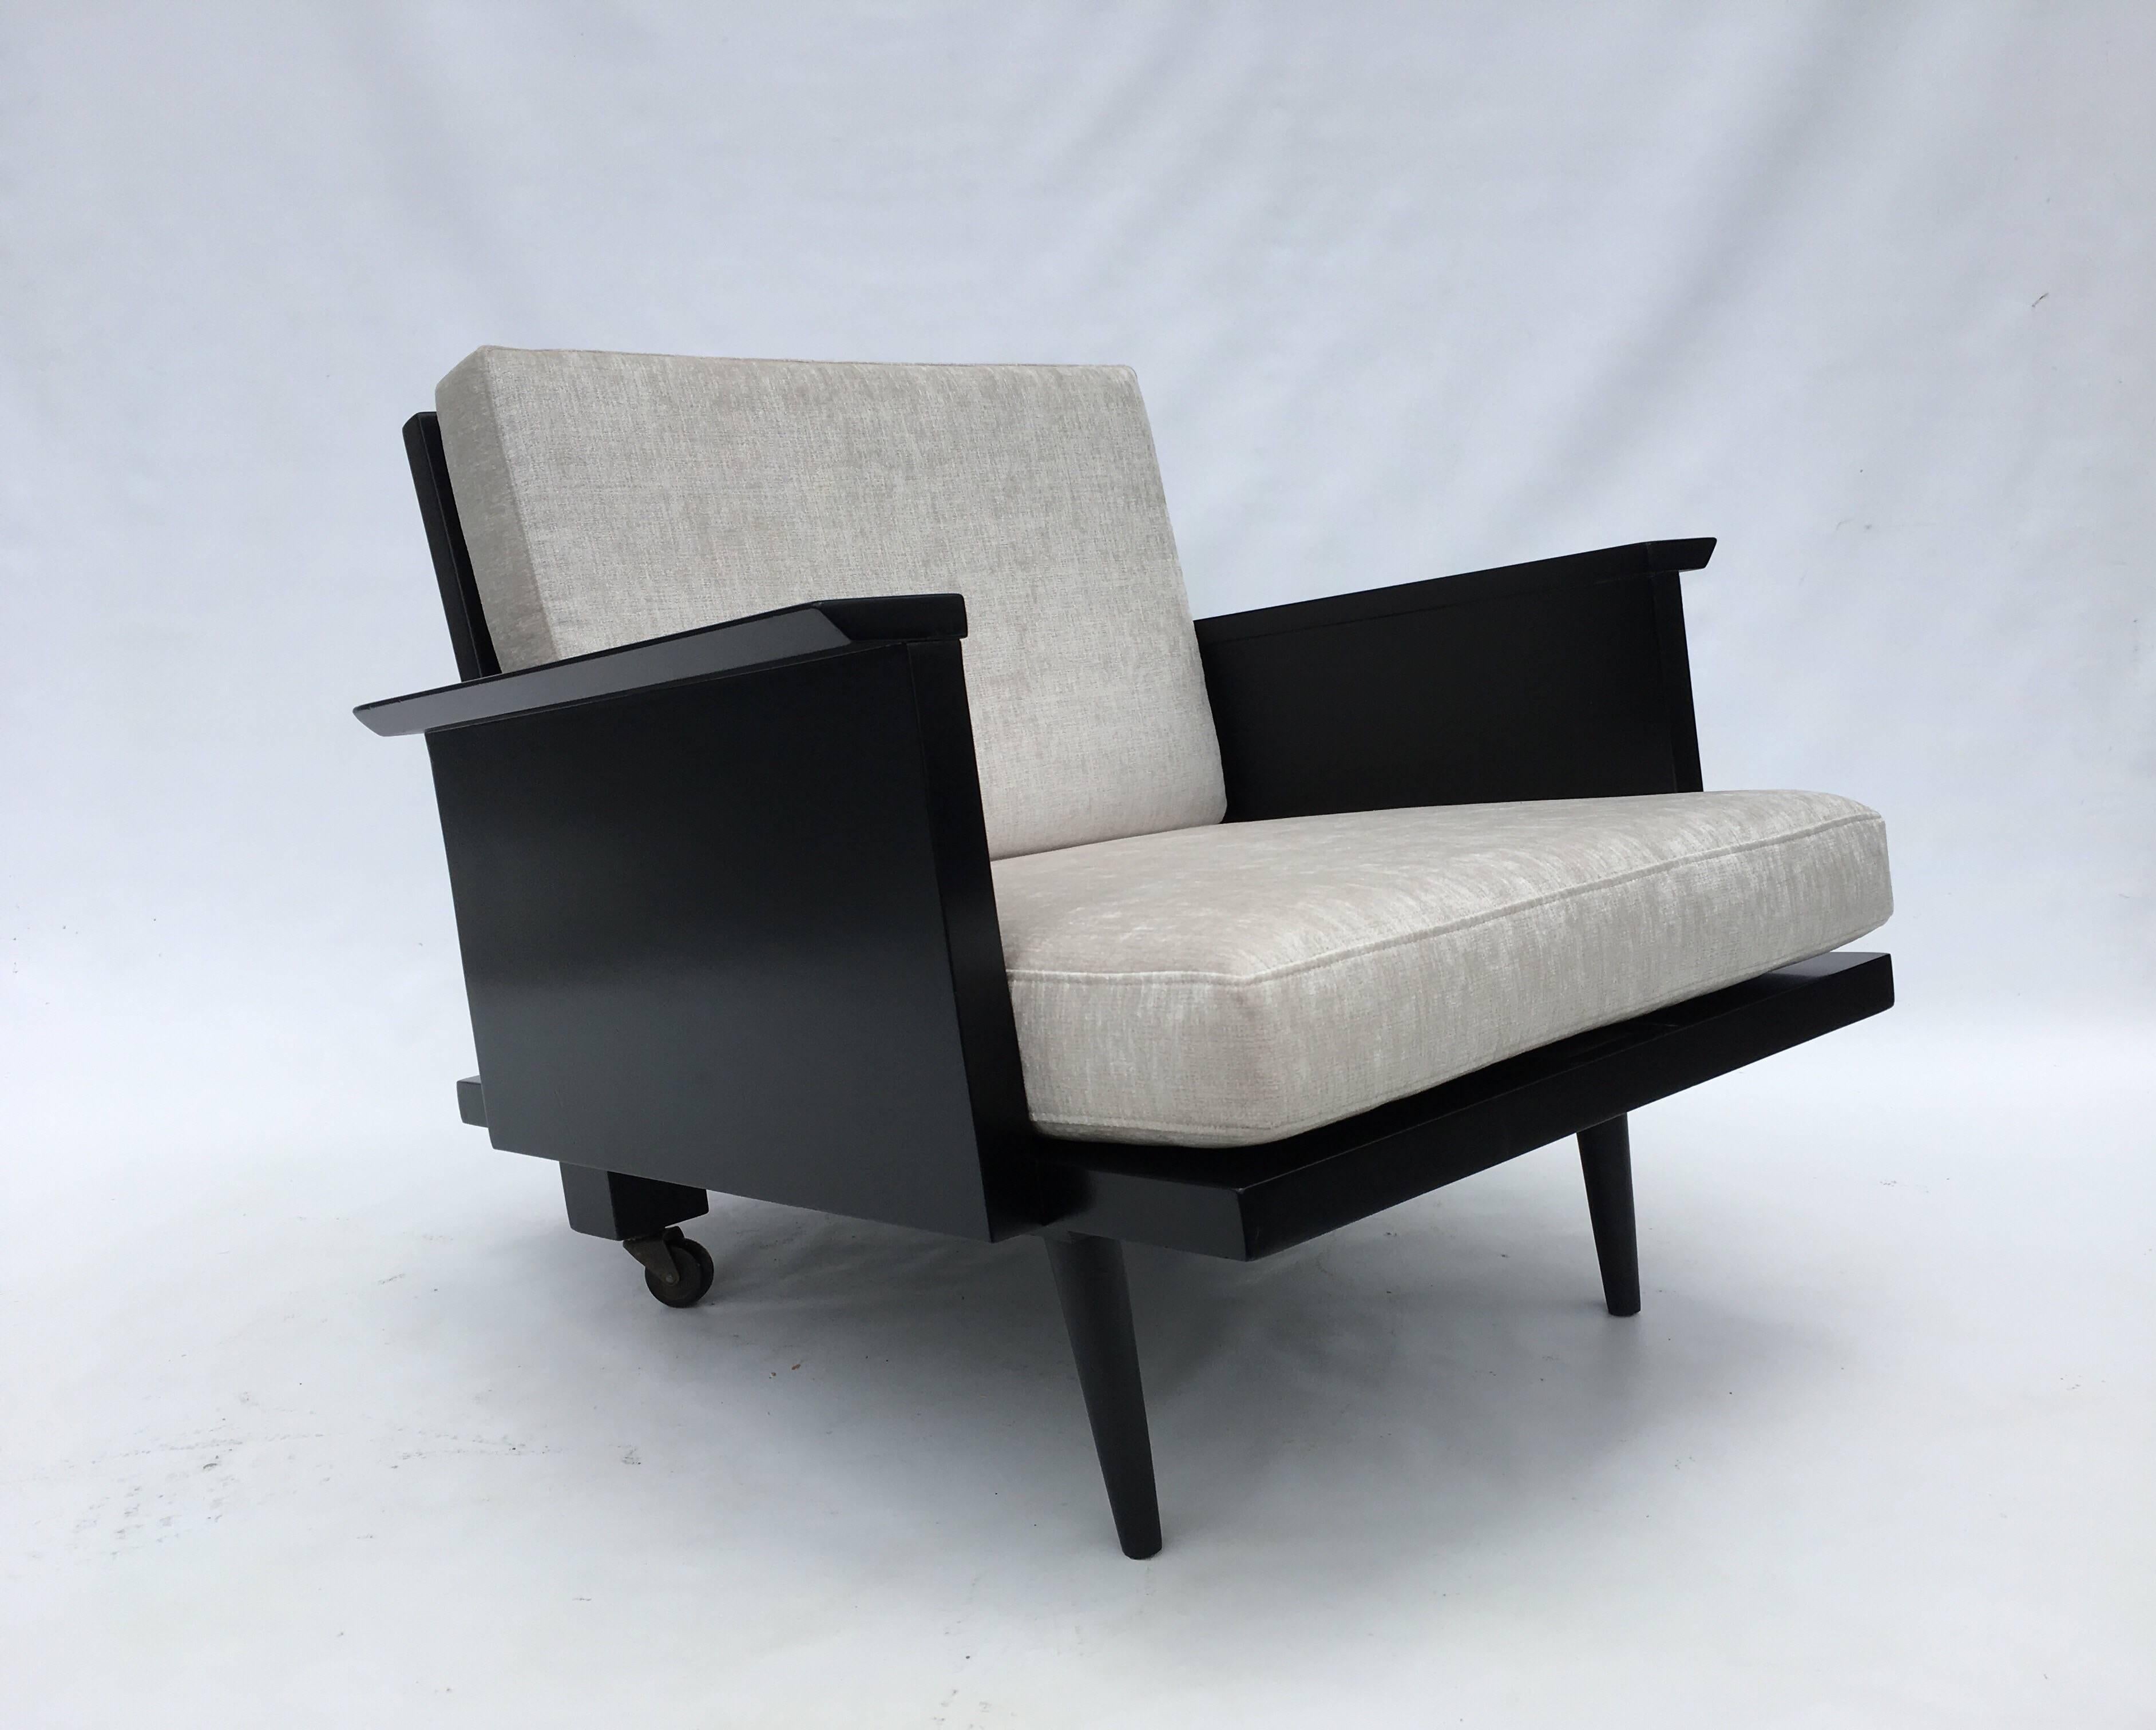 Pair of Mid-Century Modern Lounge Chairs by Modernage 1